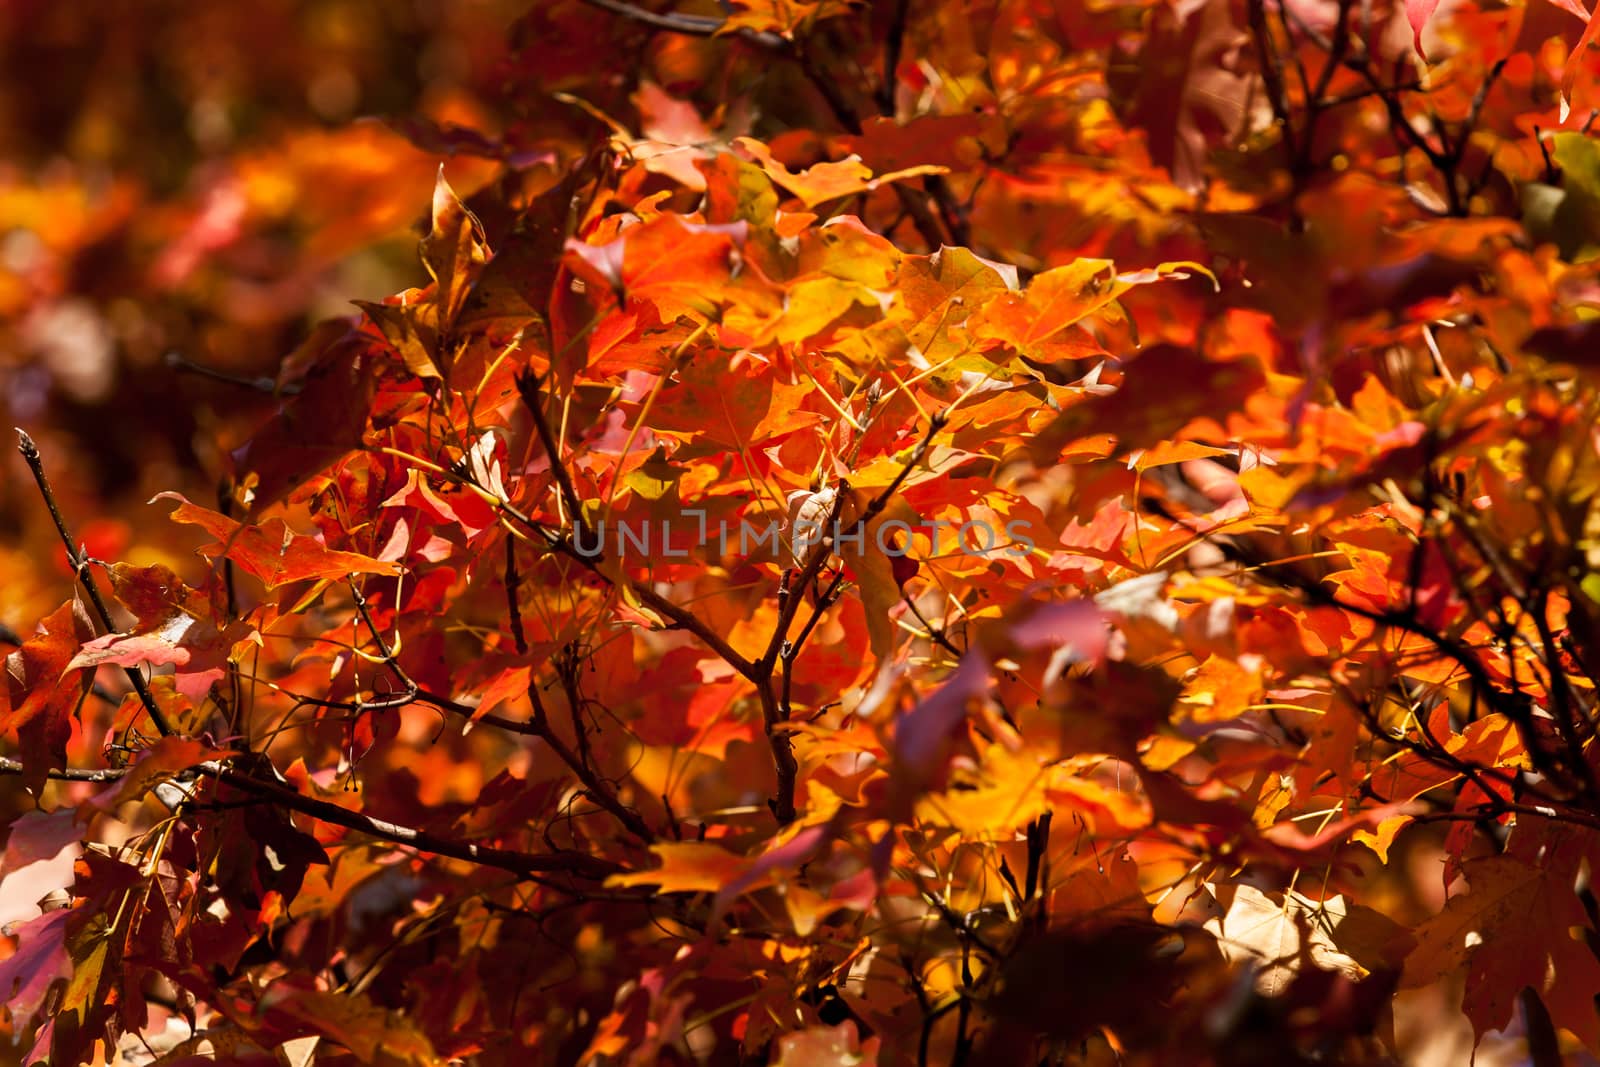 Autumn colors leaves of liquid amber tree selective focus on ima by brians101